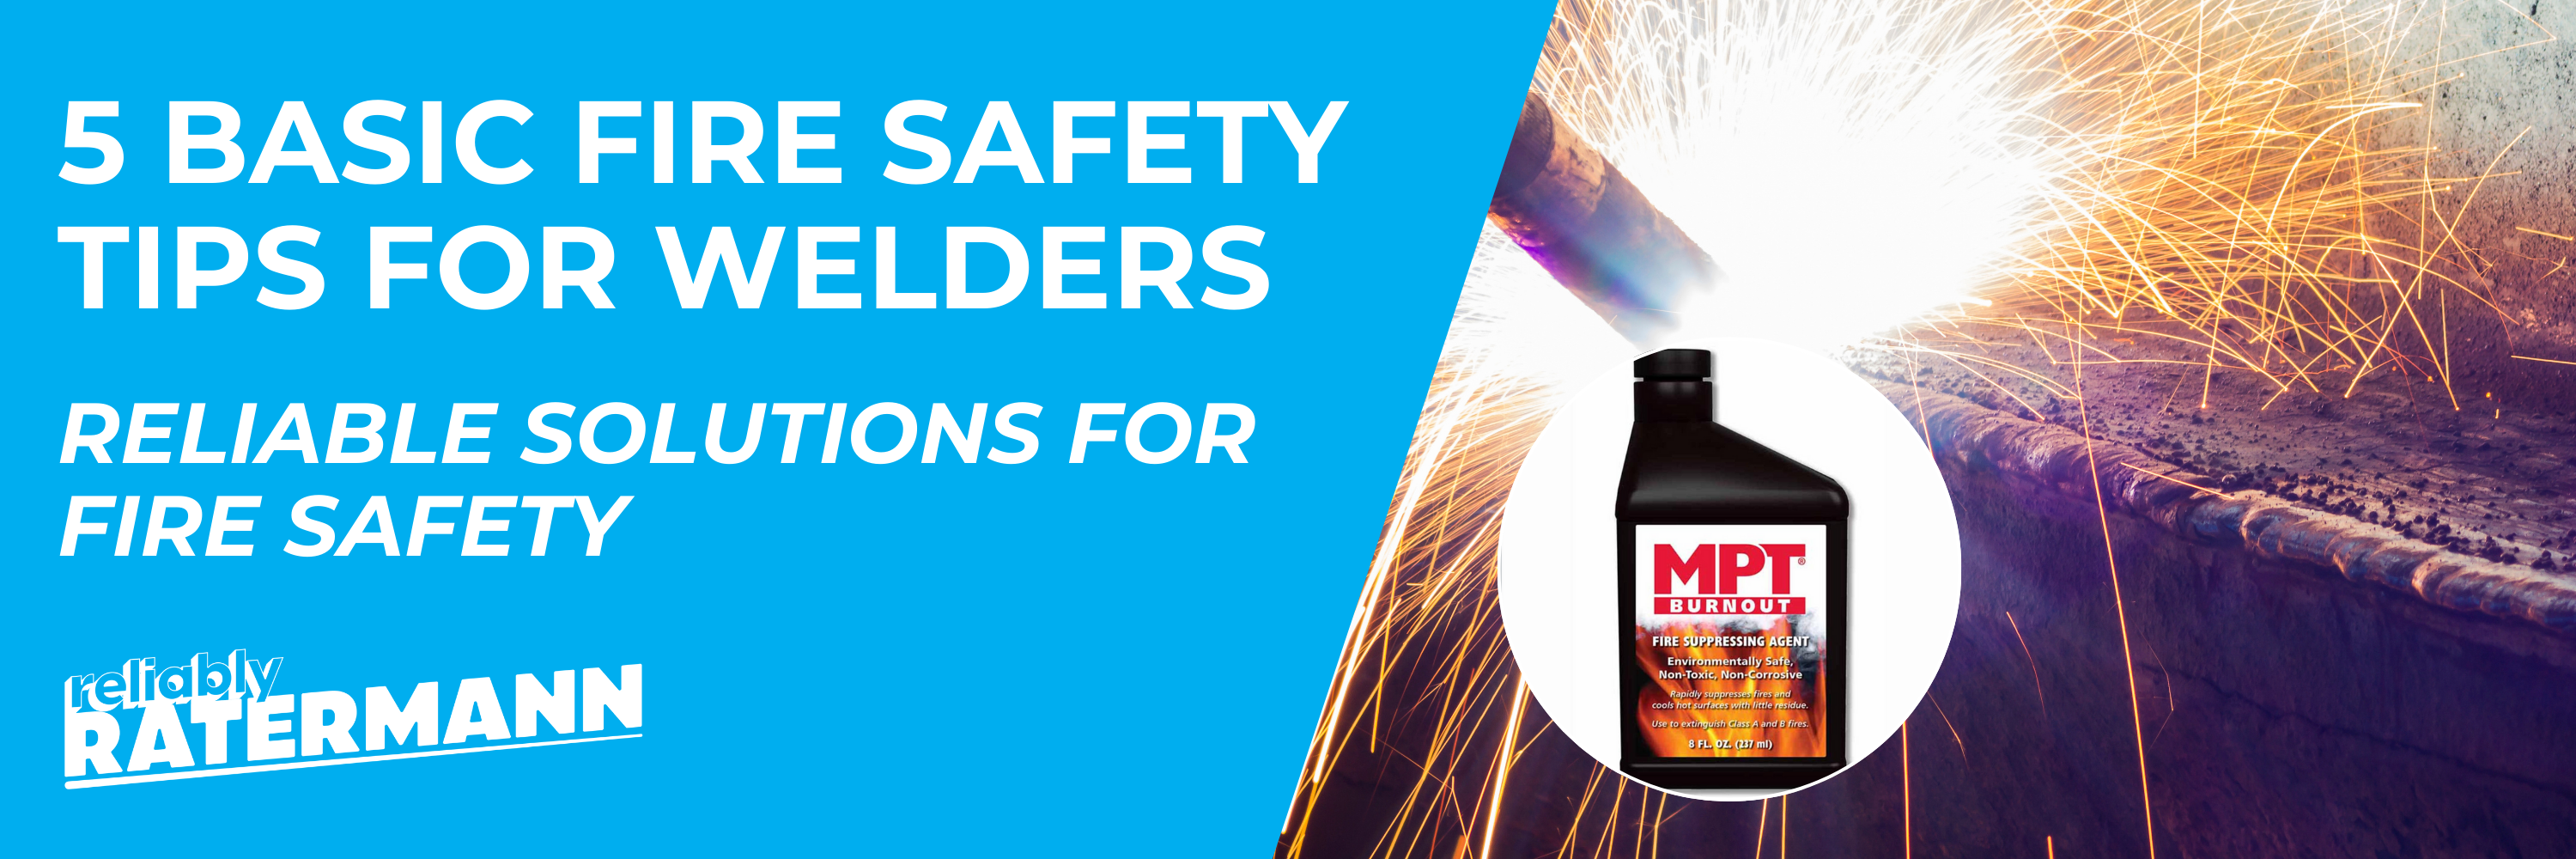 5 Basic Fire Safety Tips for Welders